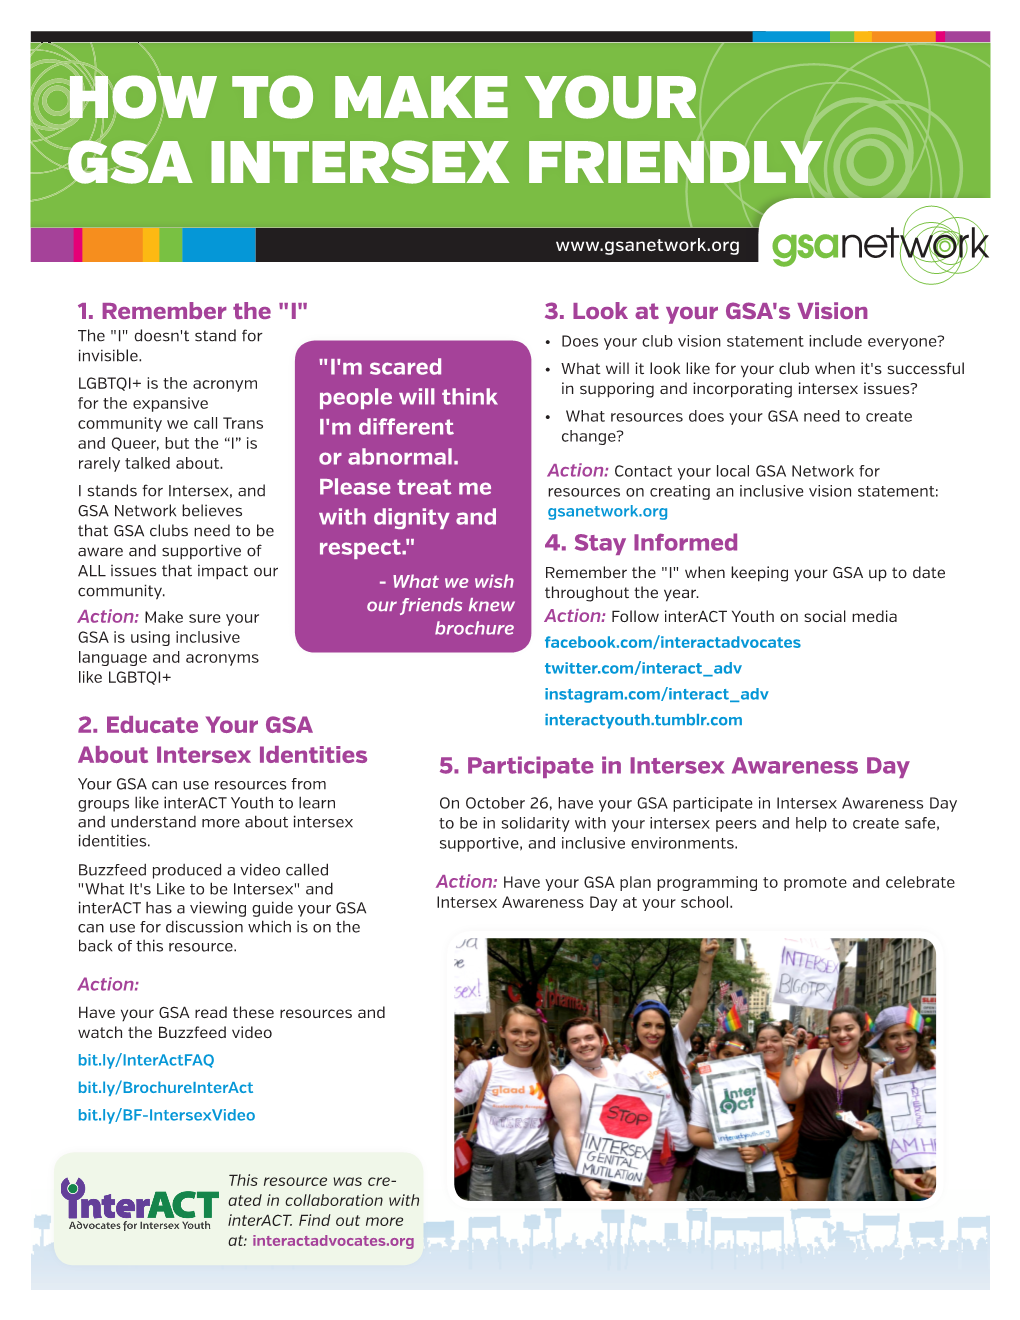 How to Make Your Gsa Intersex Friendly